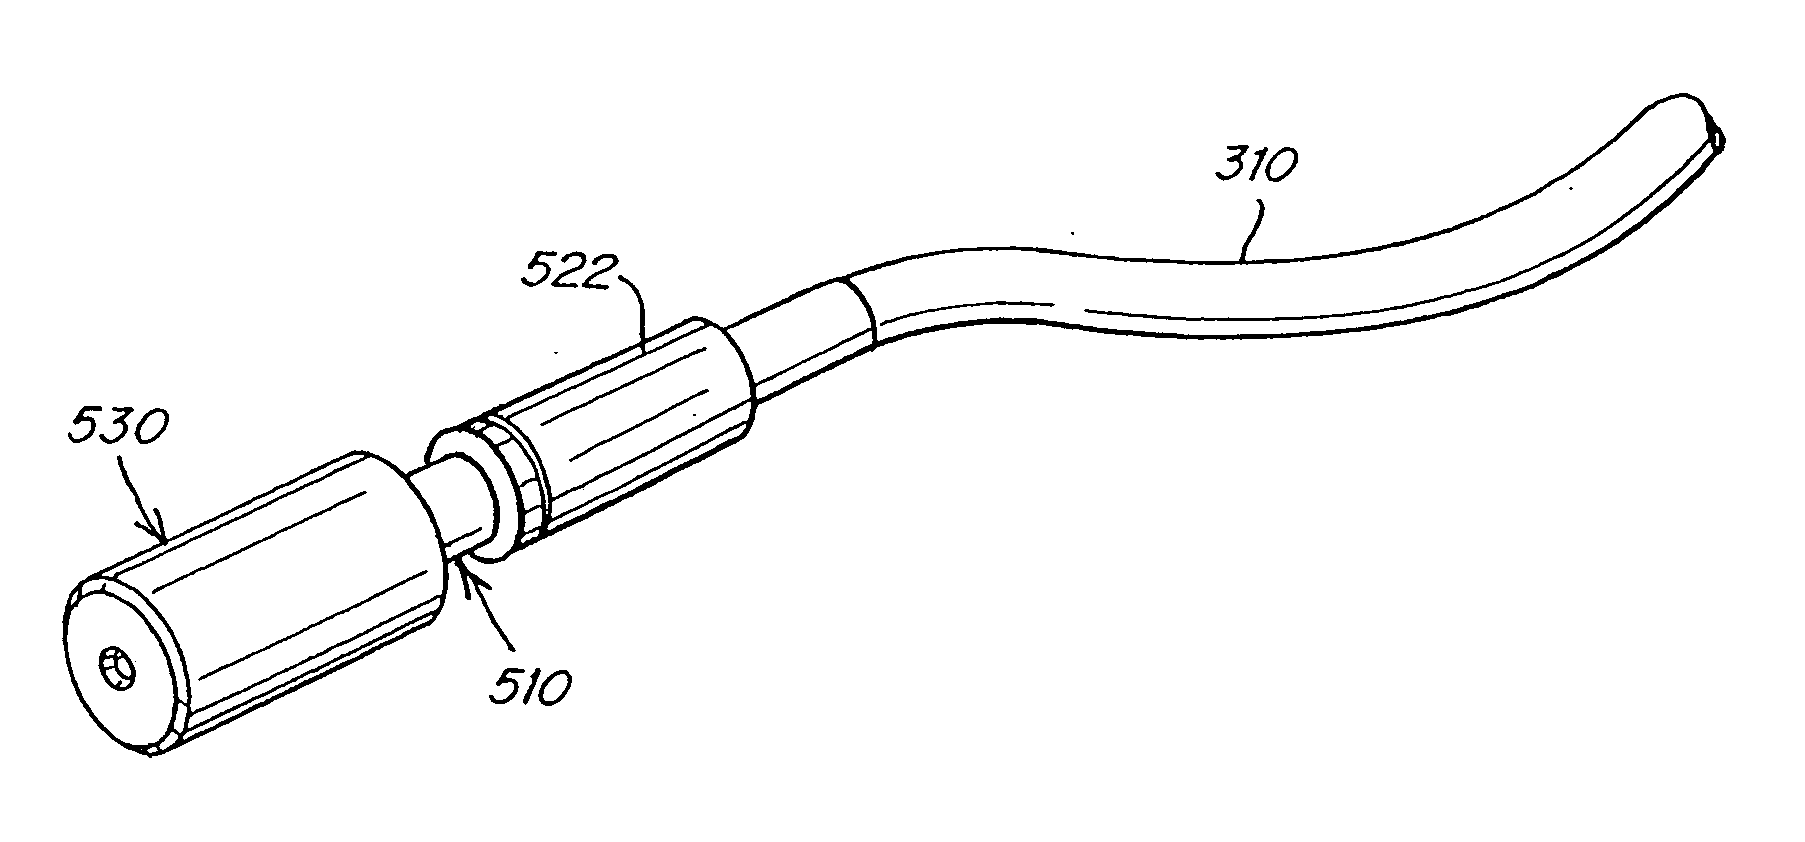 Medical device with high pressure quick disconnect handpiece